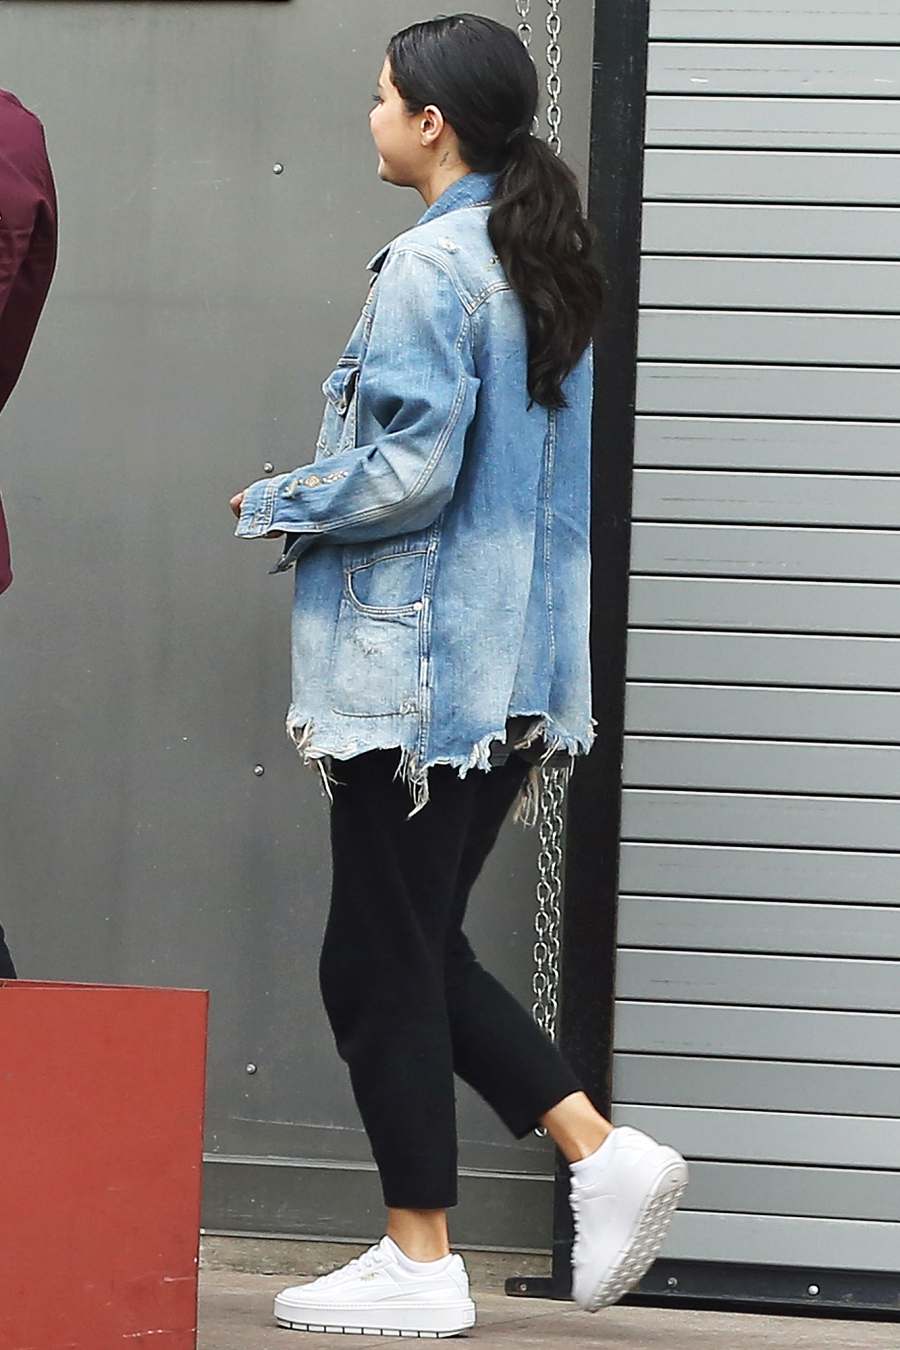 Selena Gomez Steps Out After Rehab Treatment